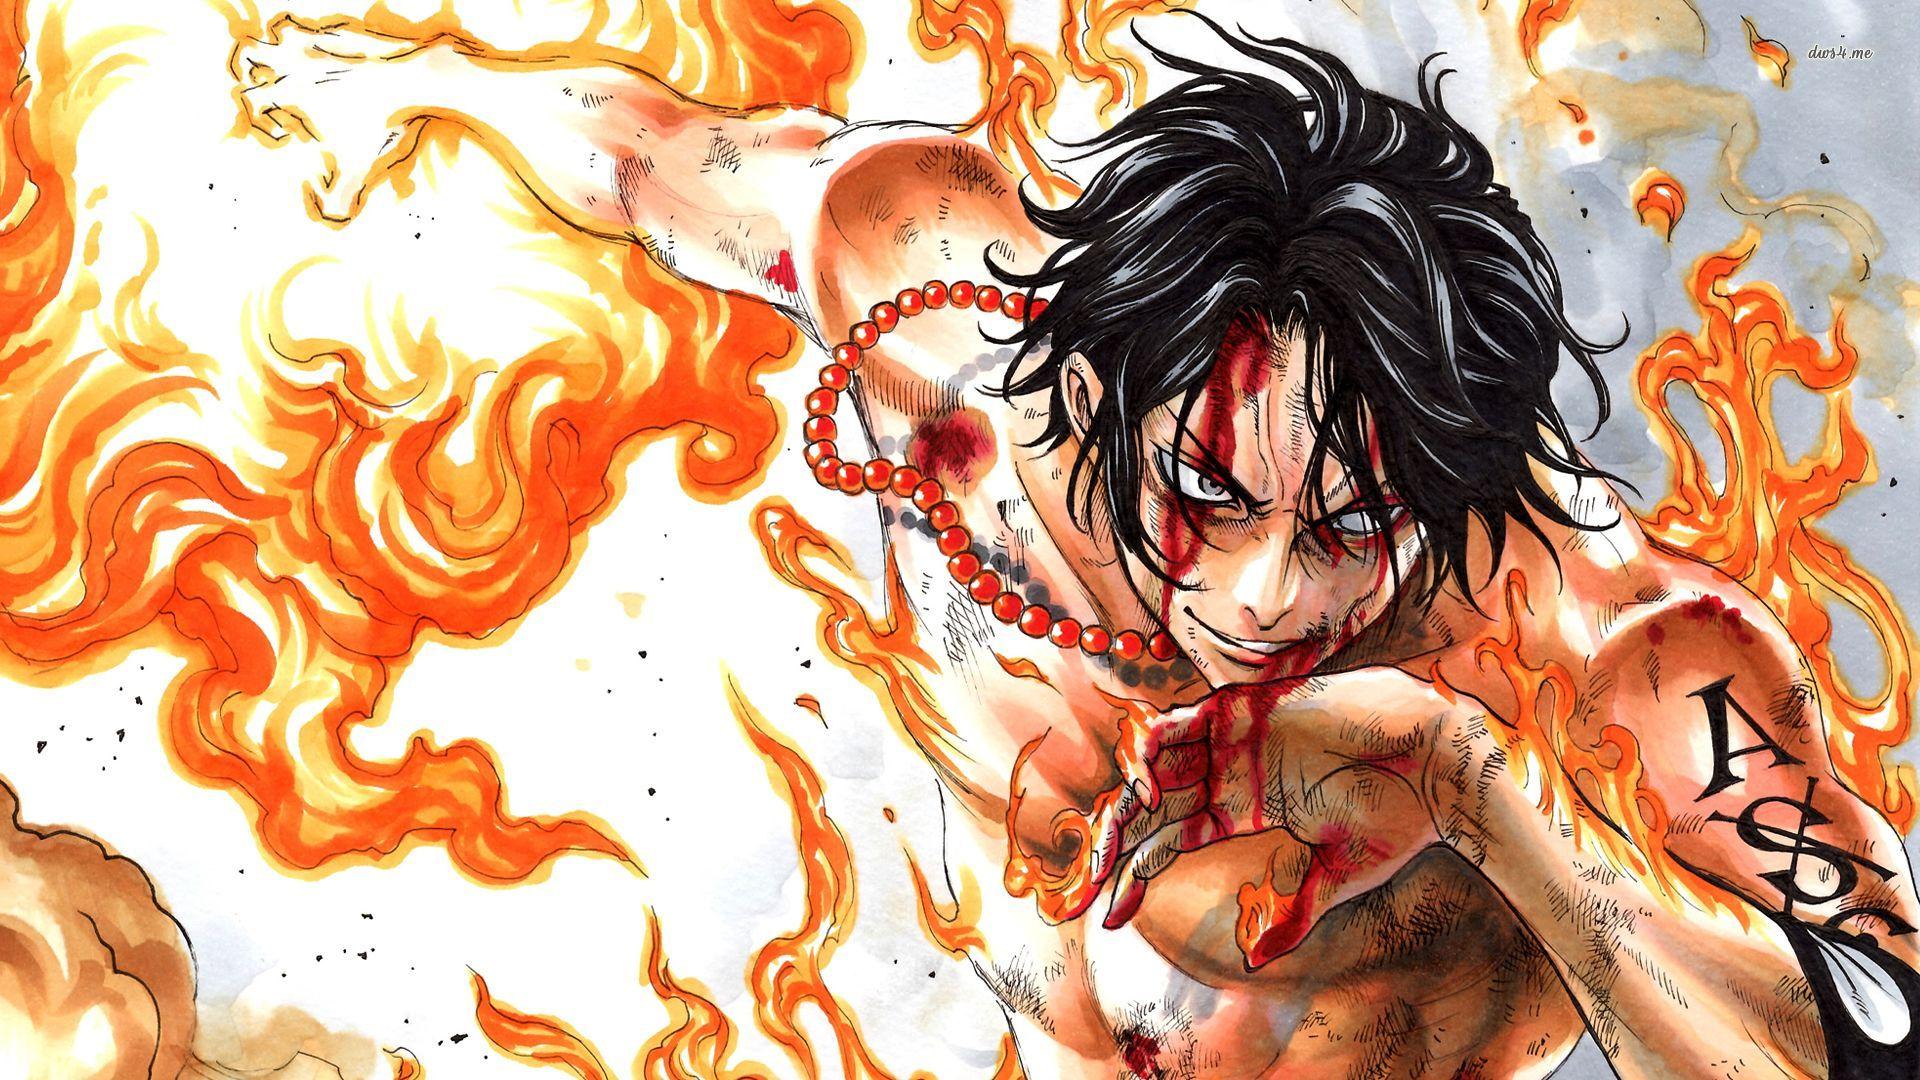 about One Piece Wallpaper 1920x1080